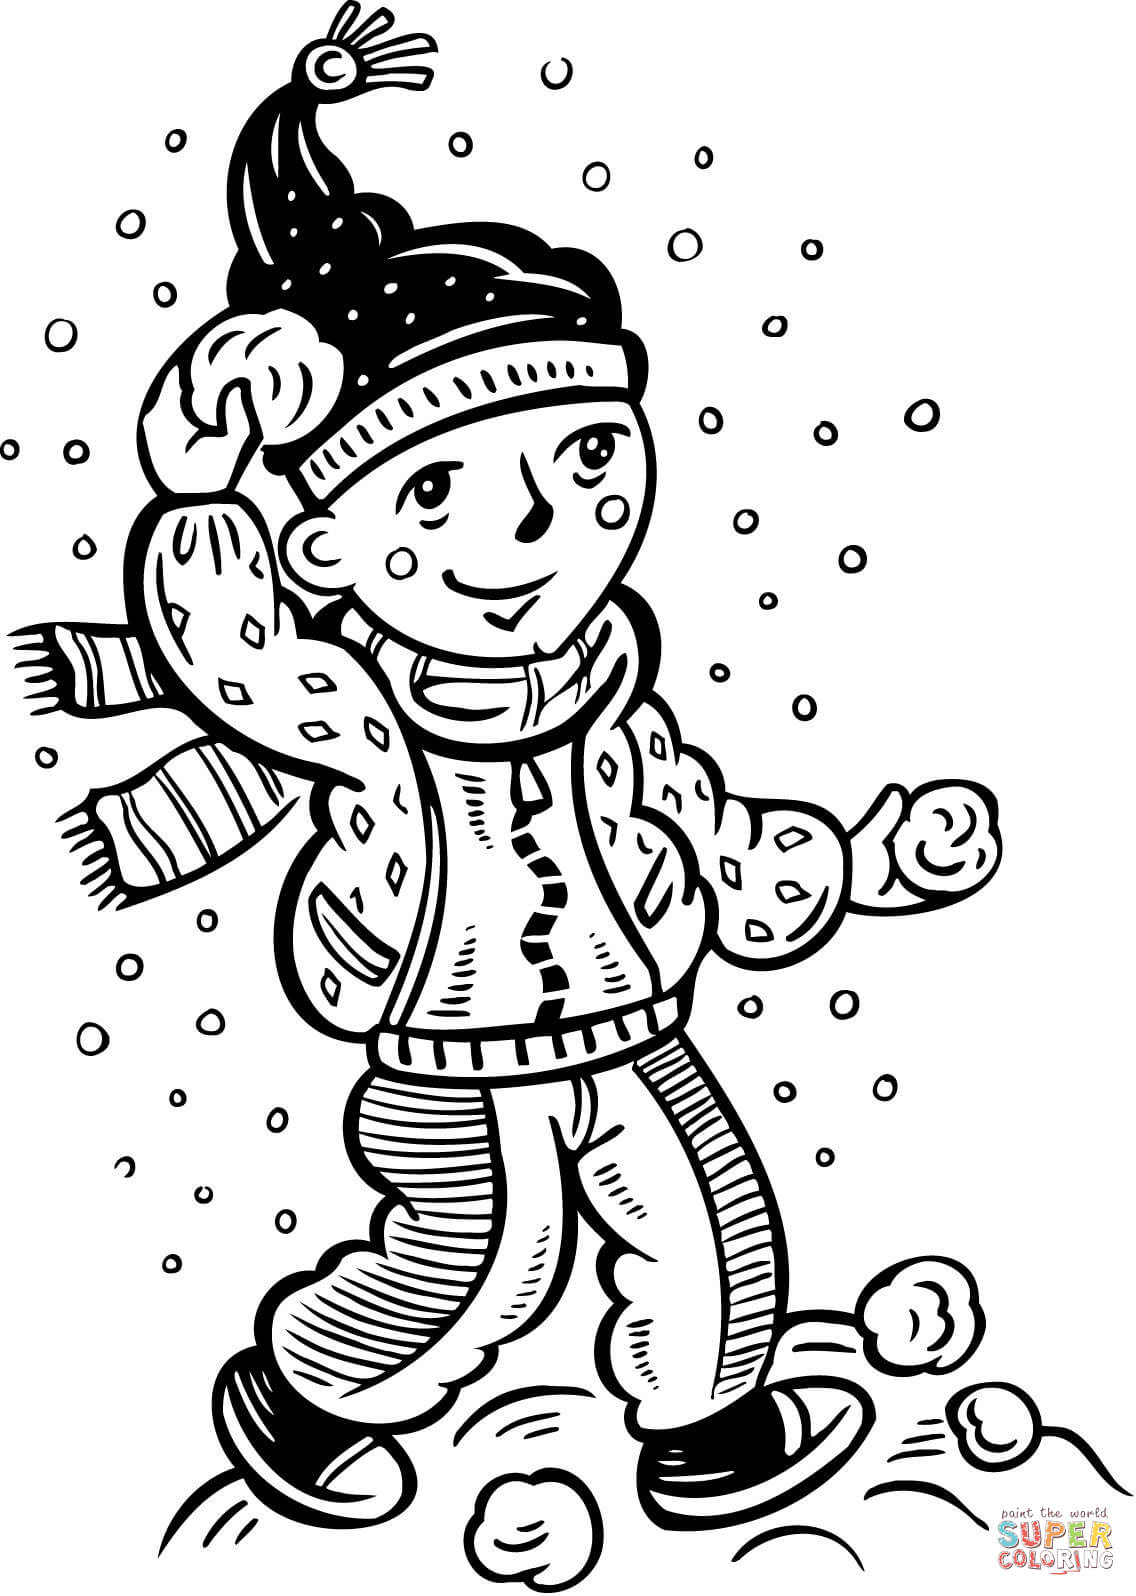 Girl in a snowball fight coloring page free printable coloring pages